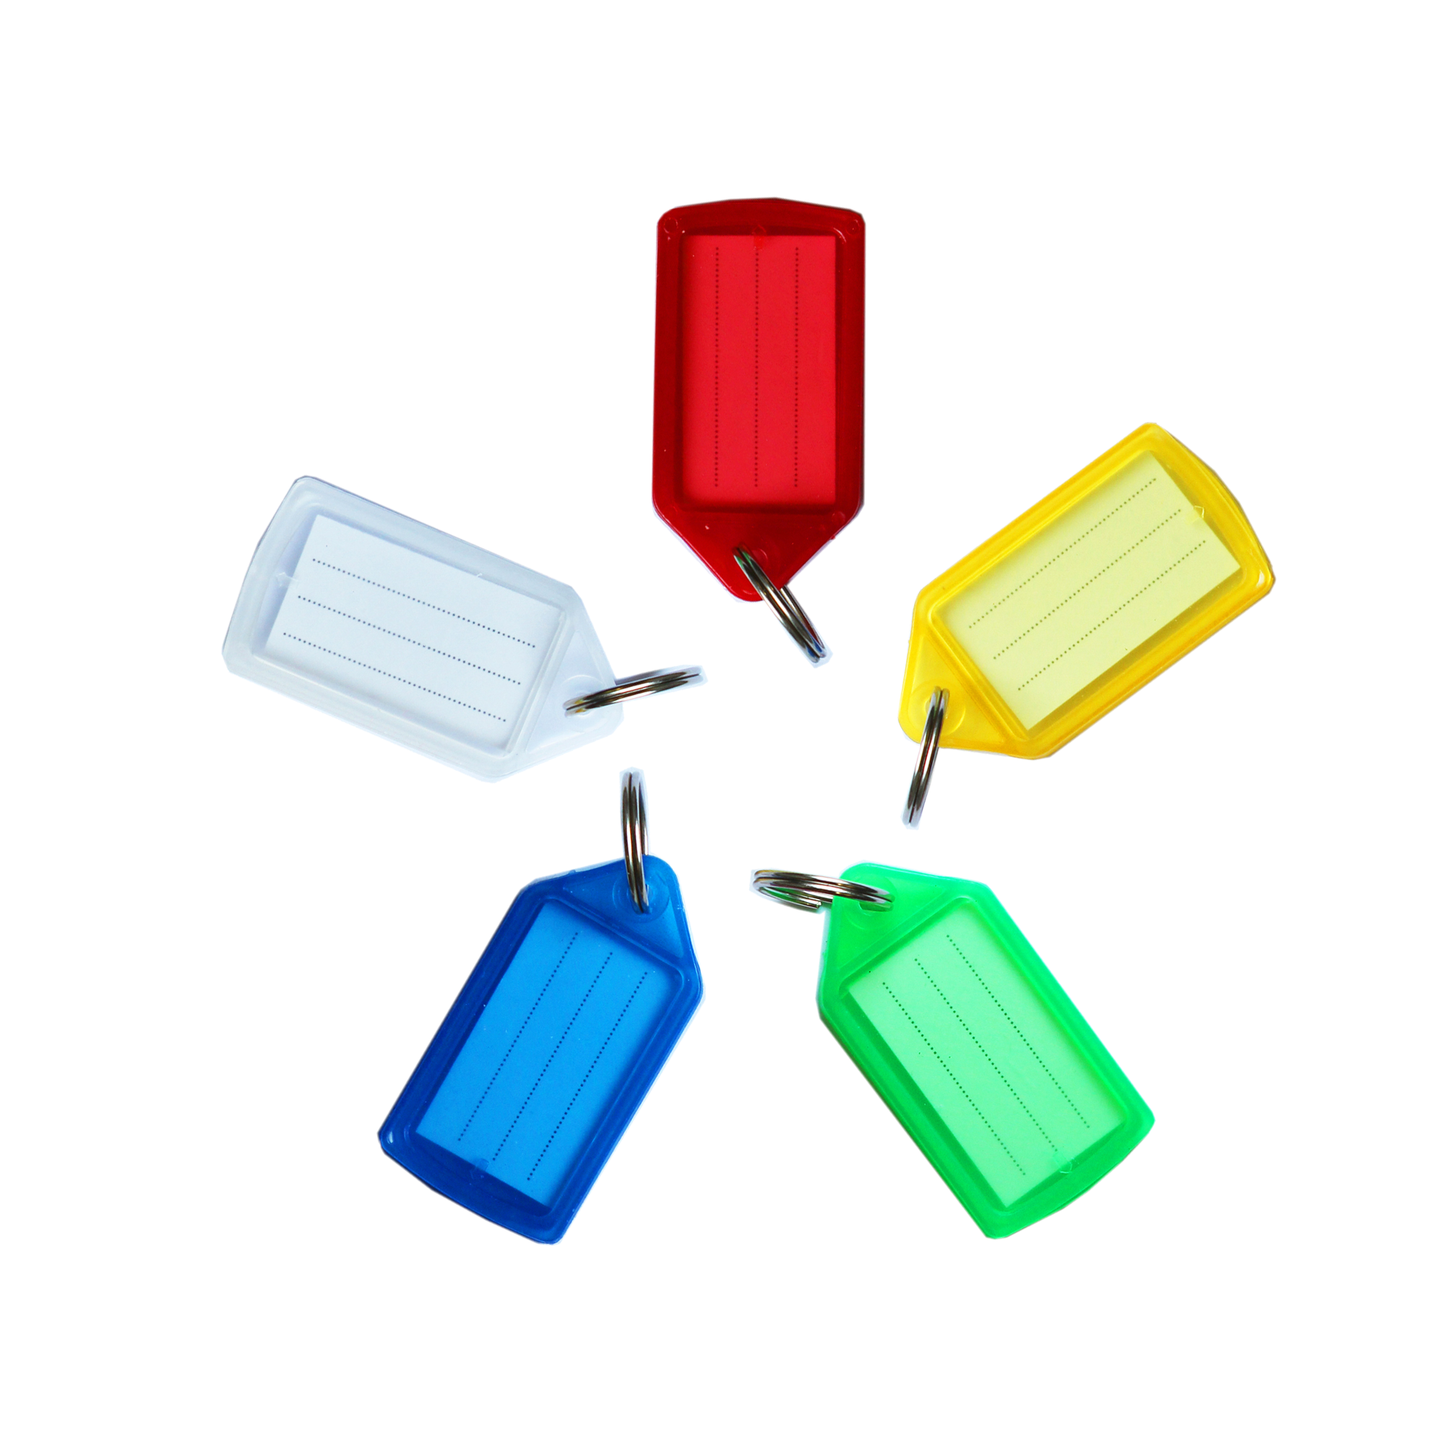 An assortment of colourful small sliding key tags with metal rings, displayed against a white background. The tags are in red, yellow, green, blue, and clear, each with a paper insert for labelling.